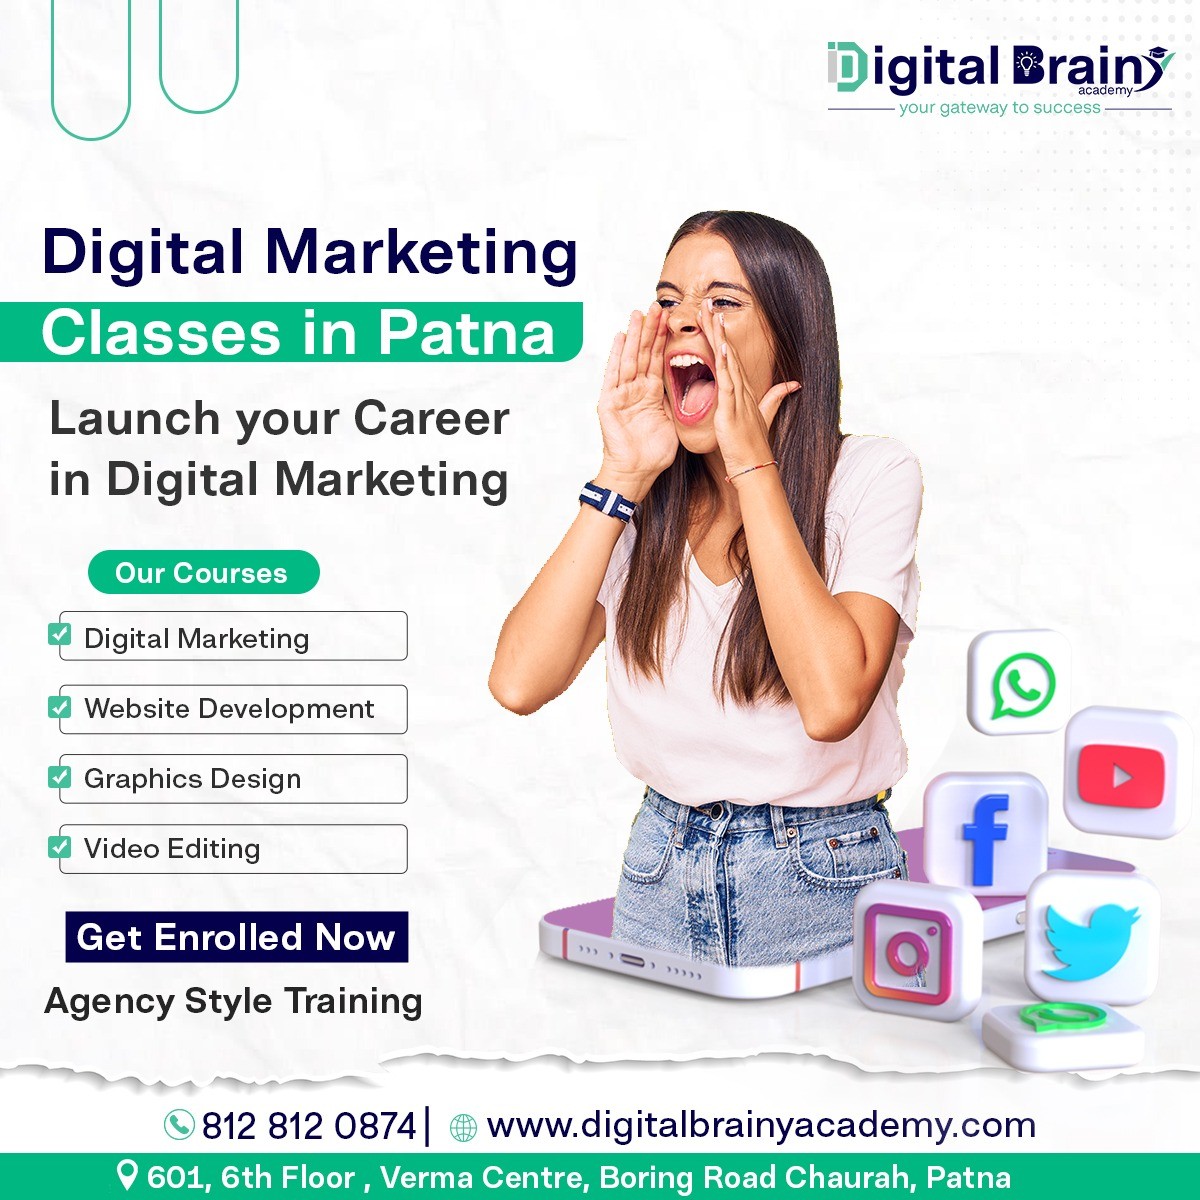 Join the Most Demand Digital Skills in the Master Digital Marketing Course in Patna by Digital Brainy Academy